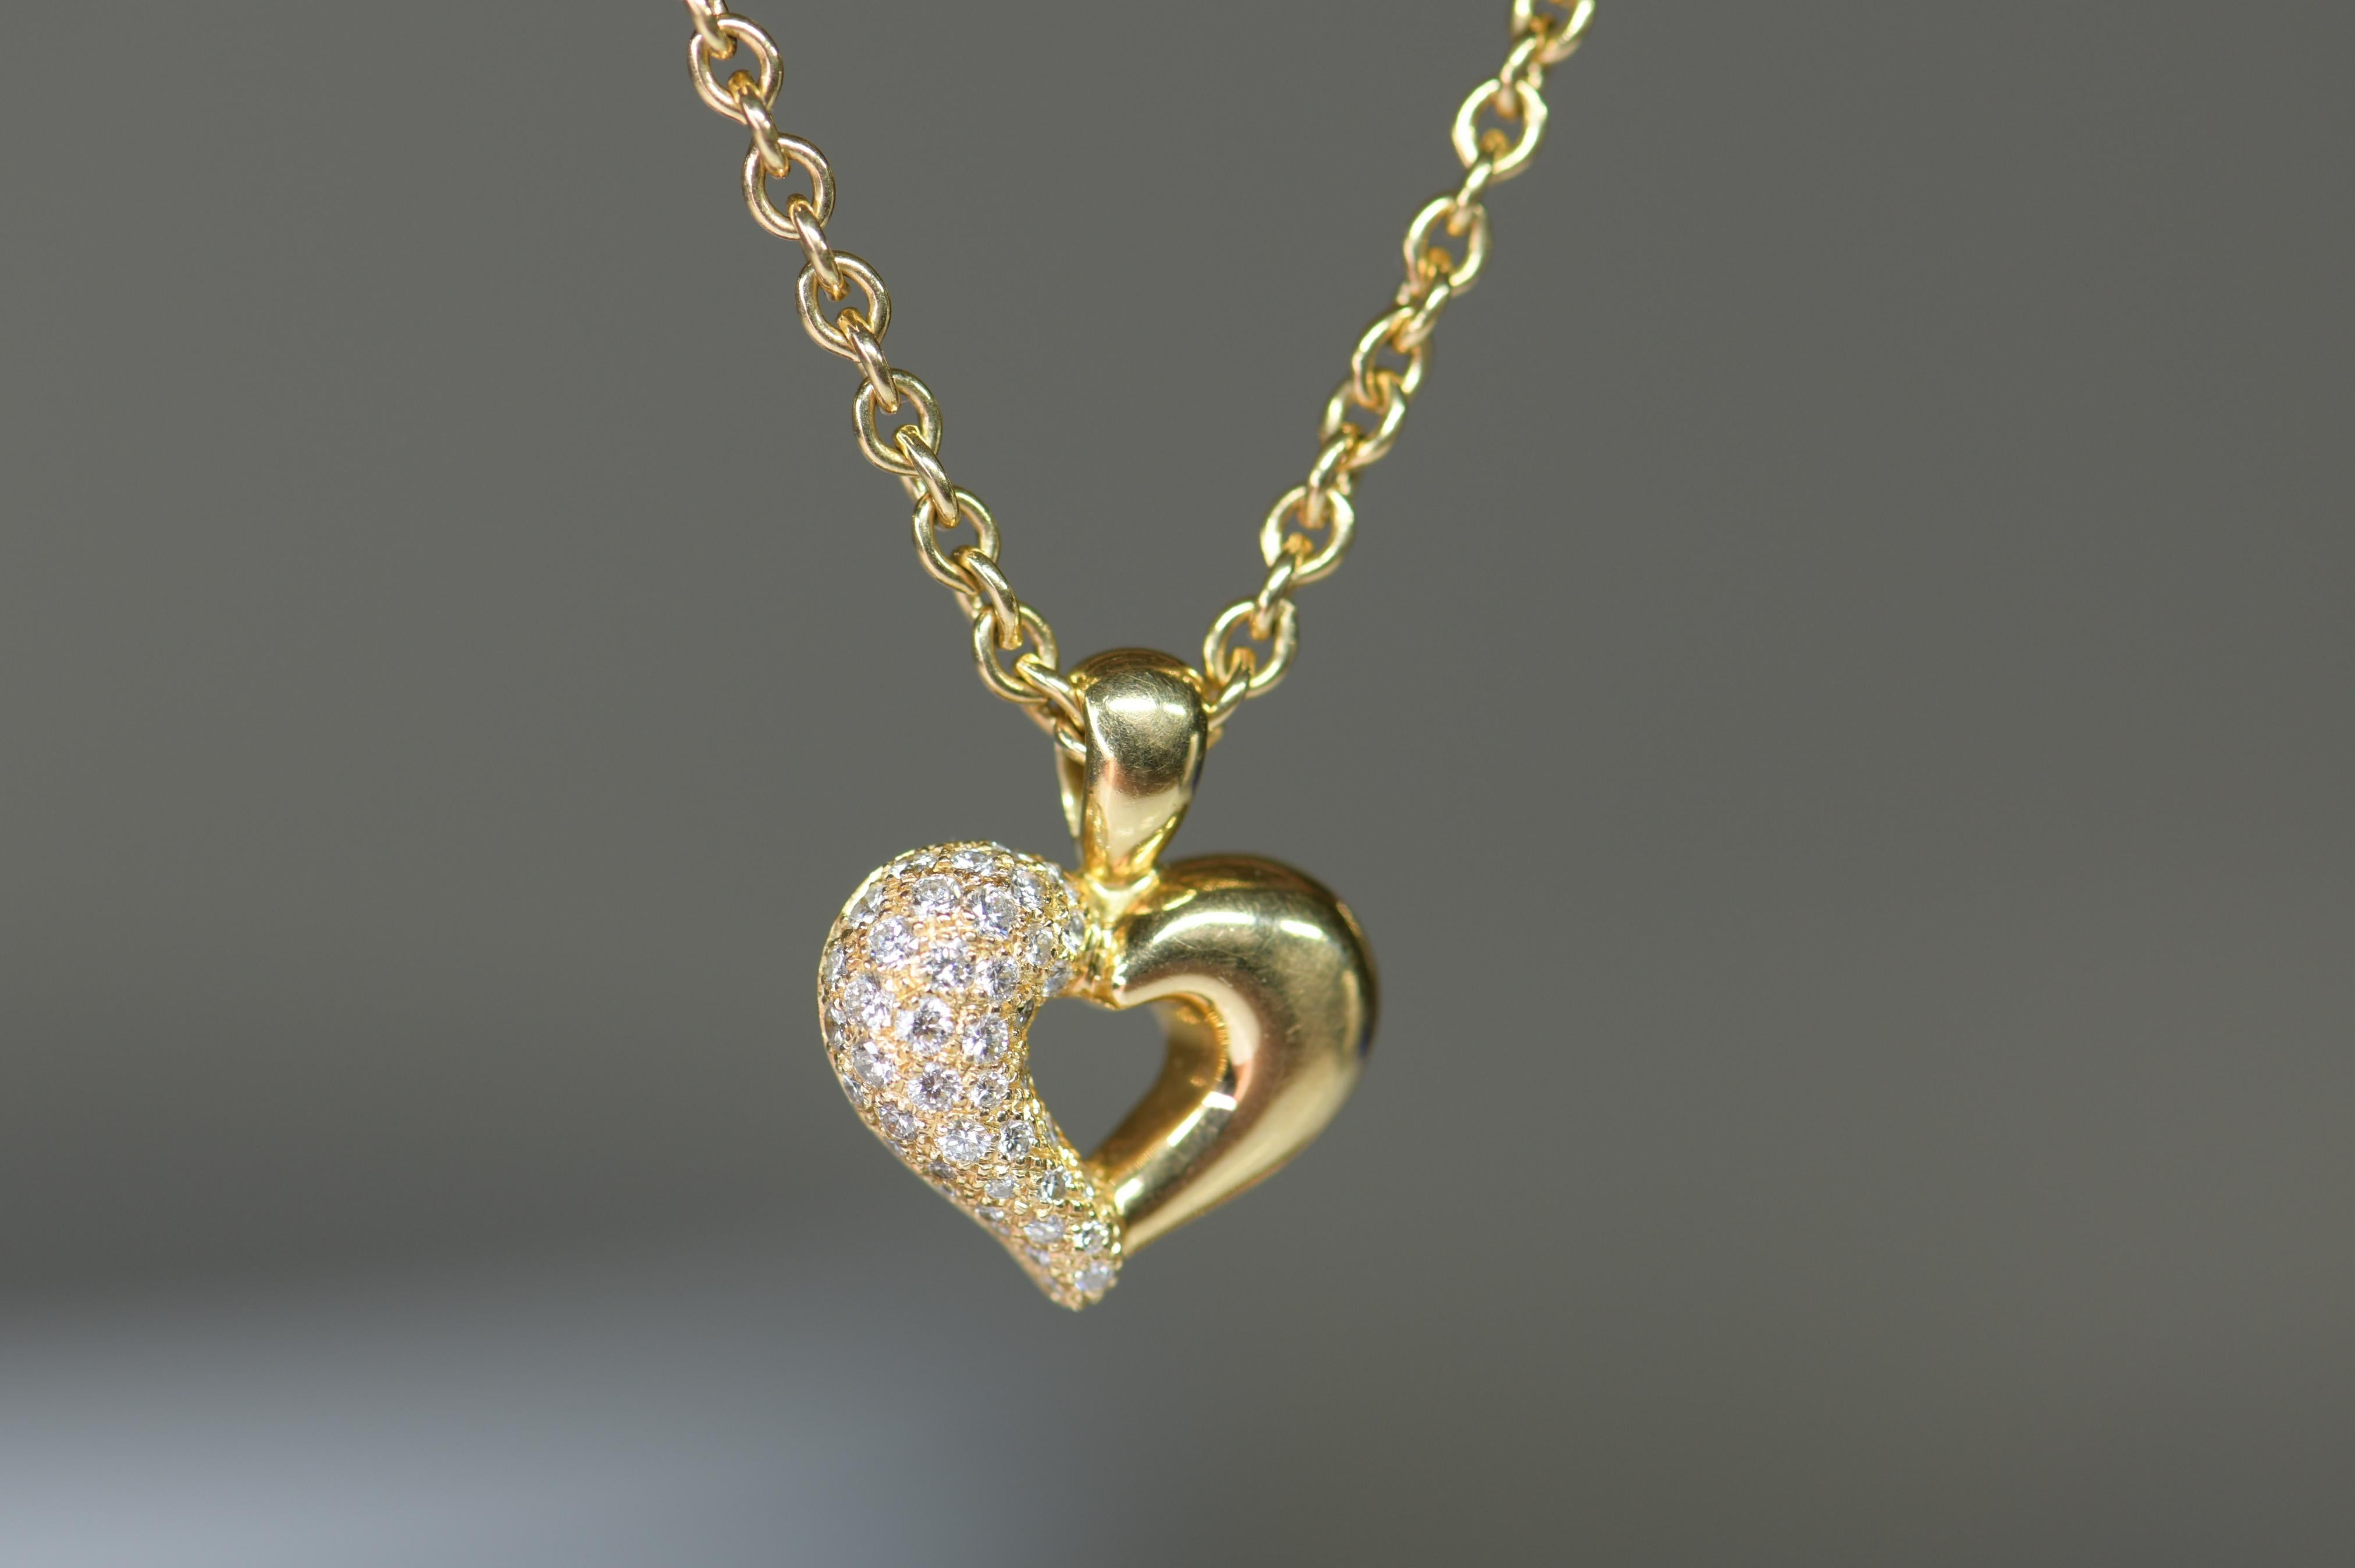 Adorable vintage Van Cleef & Arpels 18k yellow gold diamond heart necklace. The pendant features very bright diamonds. Signed and numbered by Van Cleef & Arpels.

It is currently a size M (UK), 6.25 (US), and can be re-sized free of